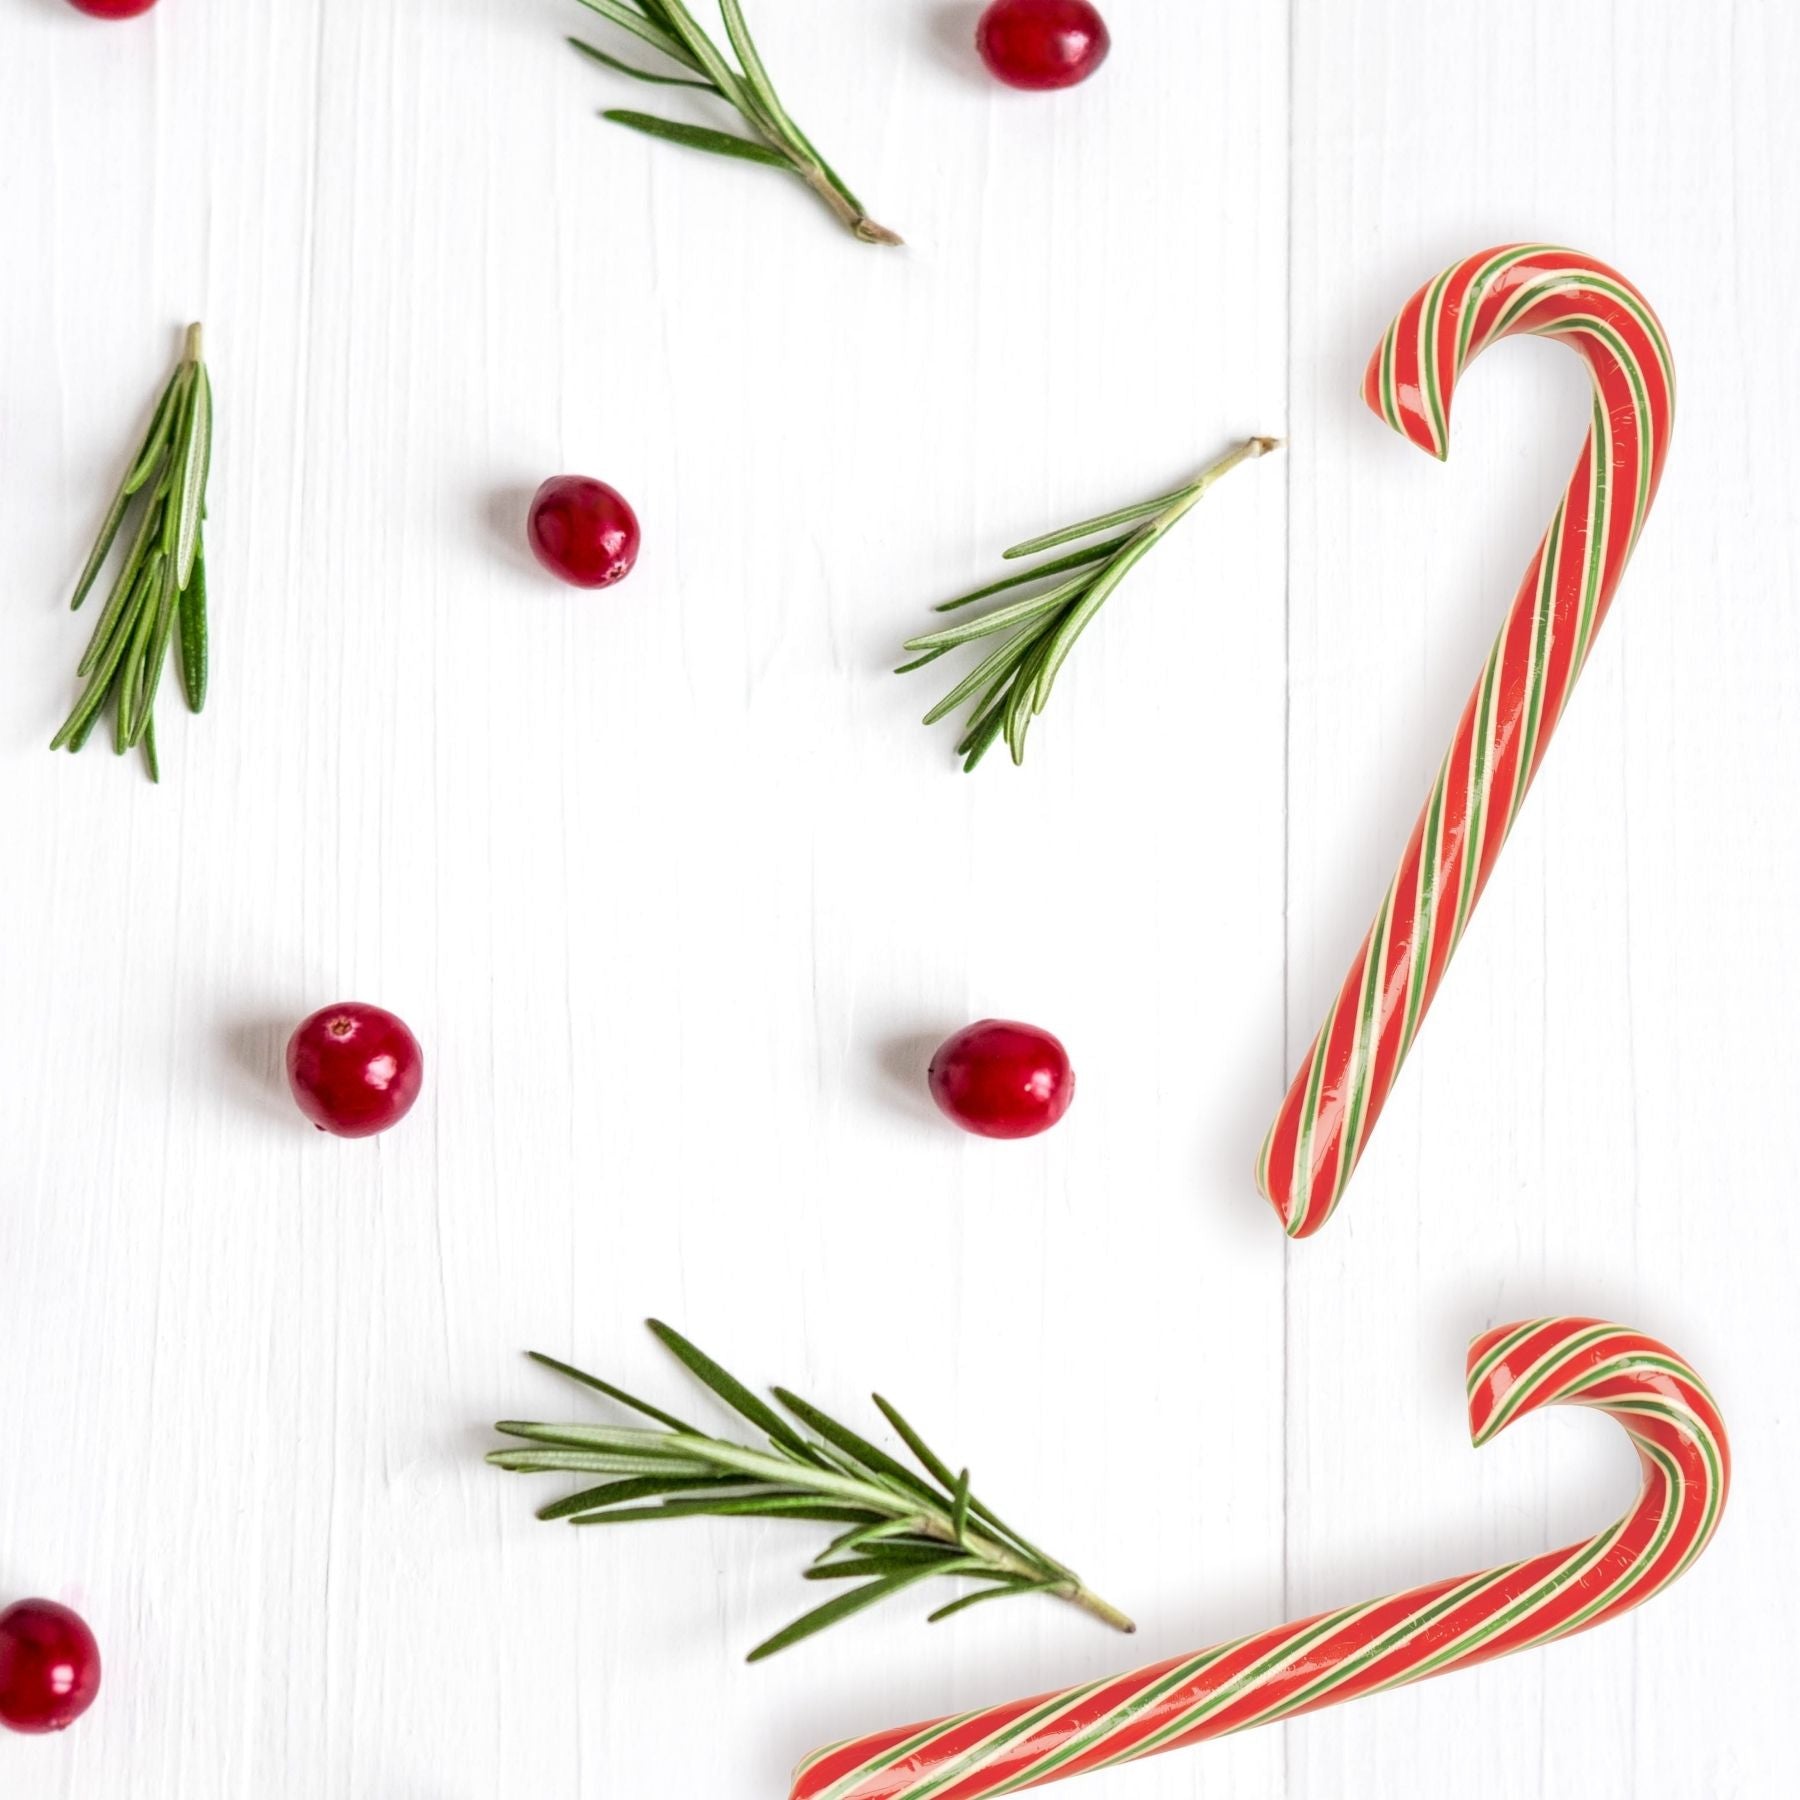 Cranberry Candy Cane Glamour Shot